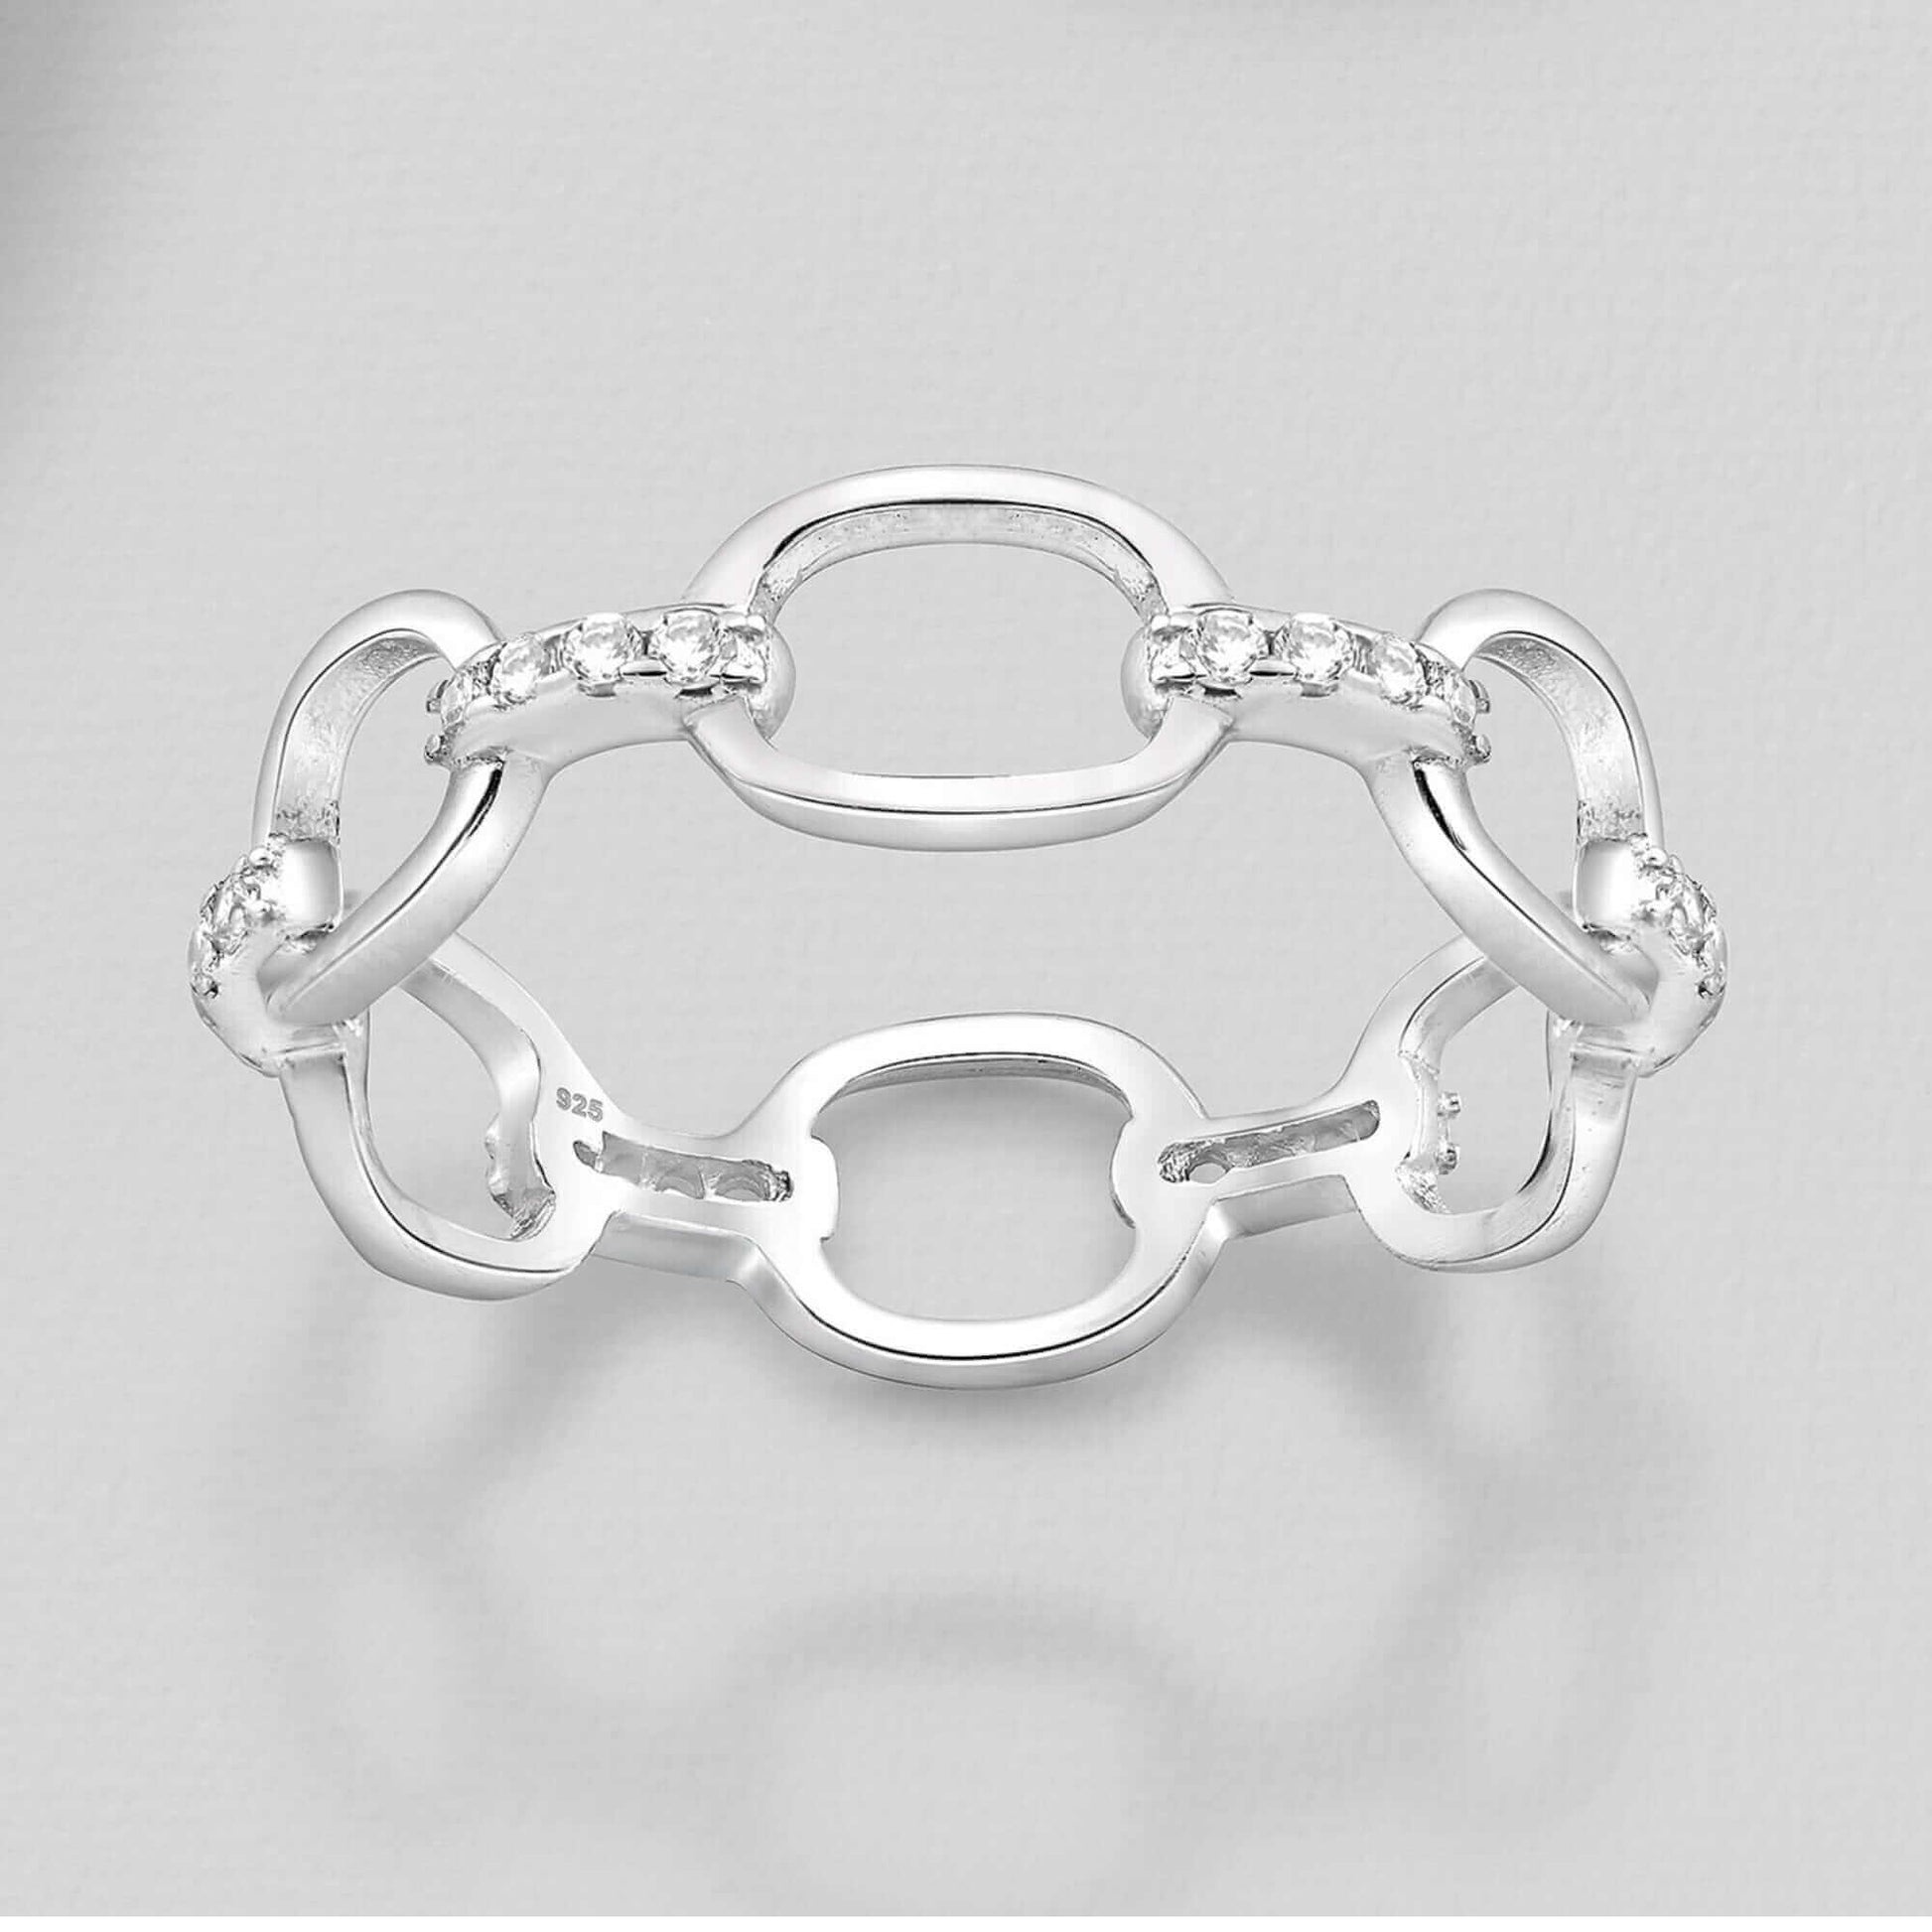 Chain link 6mm Silver Band Ring with Zirconia accents - Twelve Silver Trees